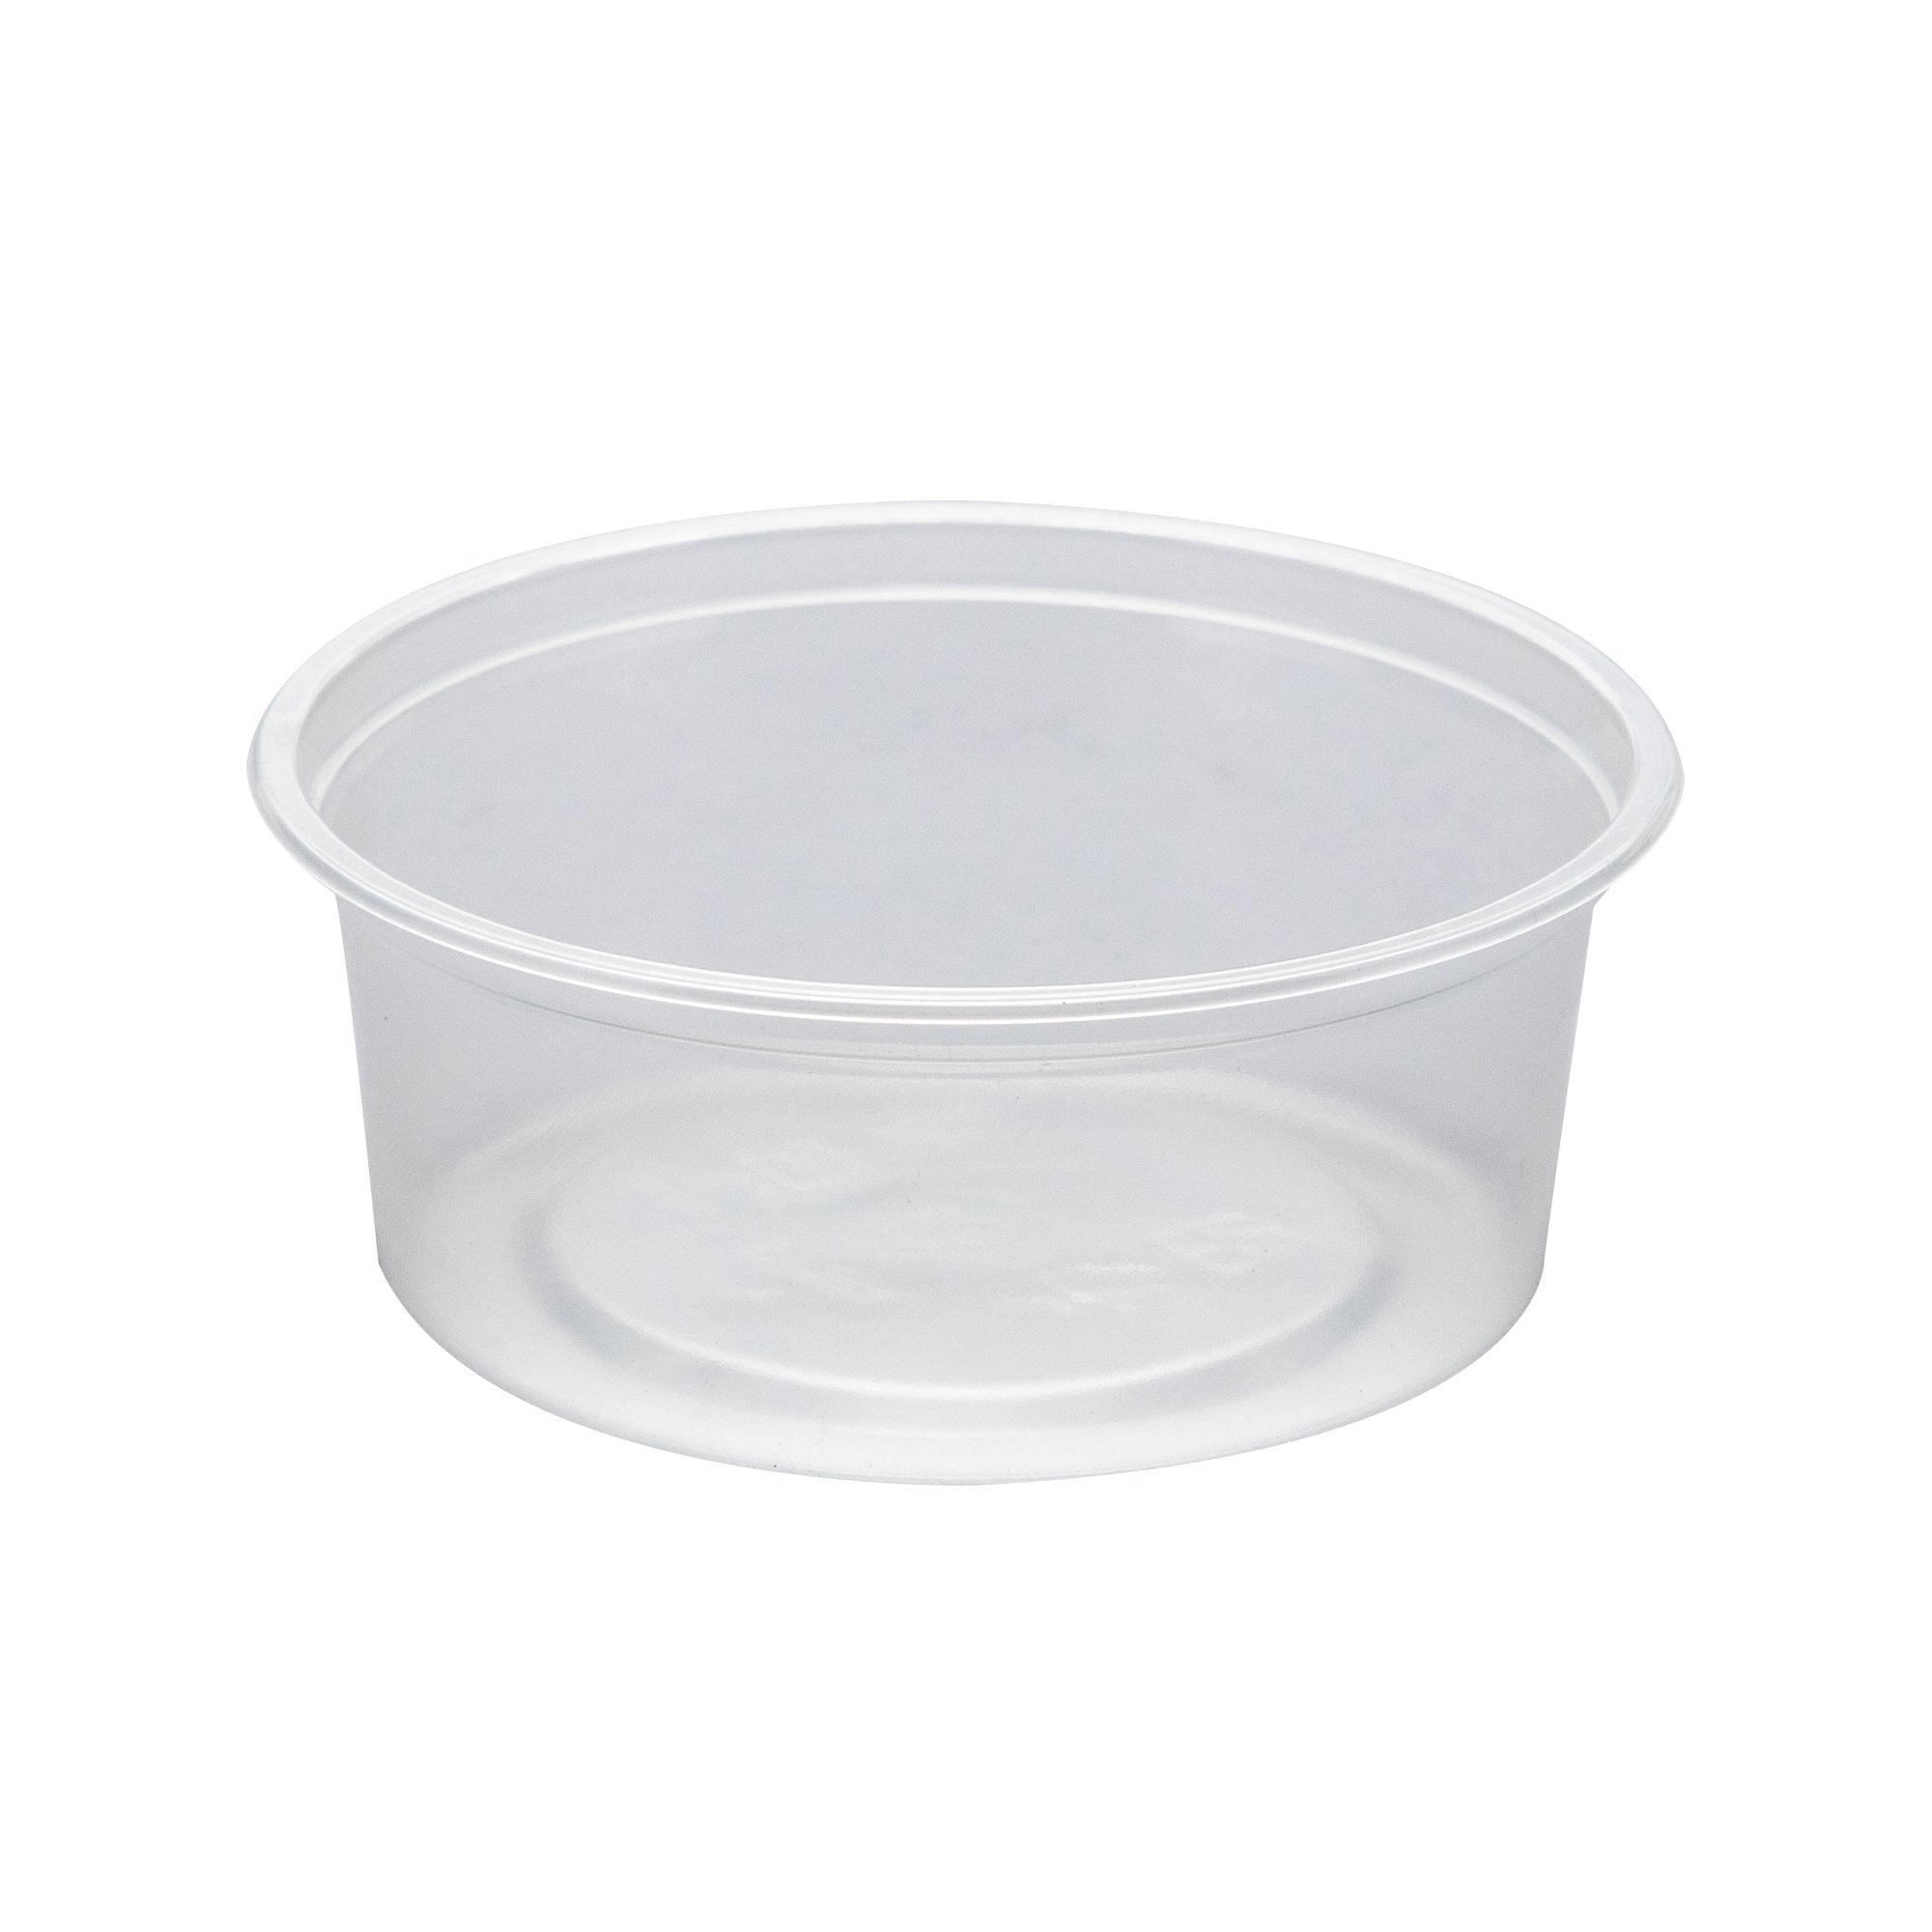 Microwavable PP Food Container 08 oz- Clear (500/case)